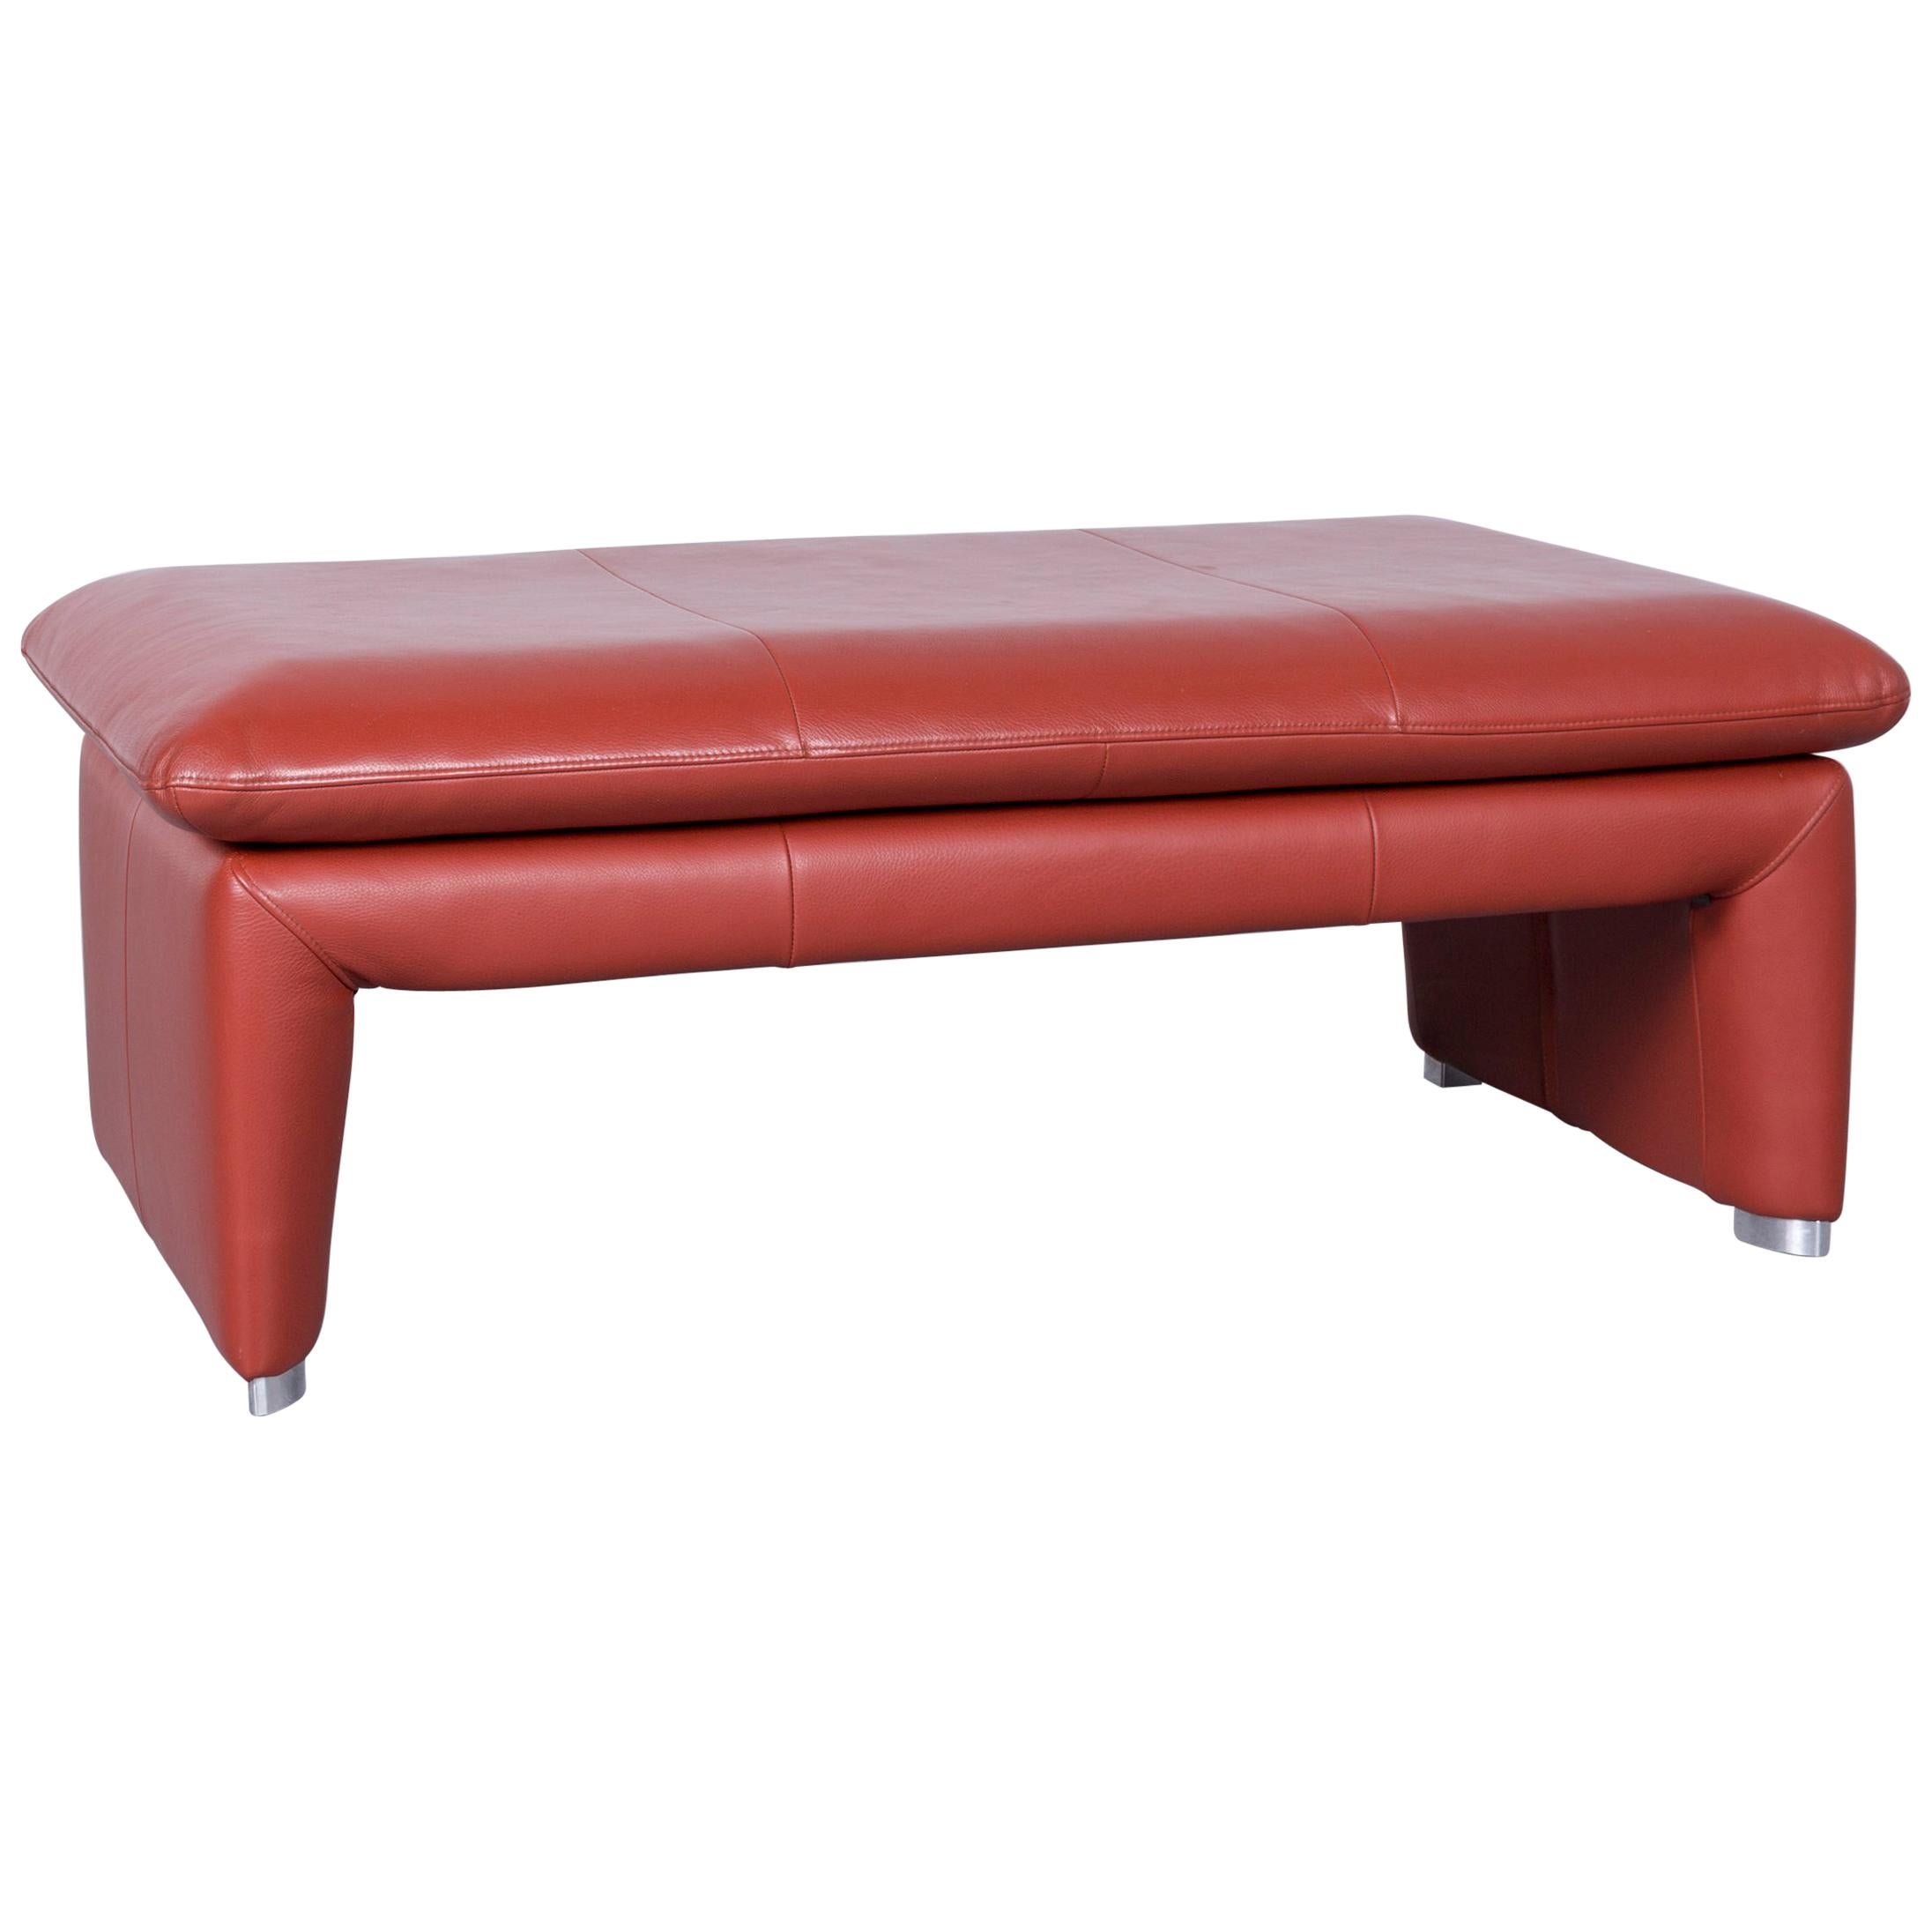 Laauser Corvus Designer Footstool Leather Red One Seat Couch Modern